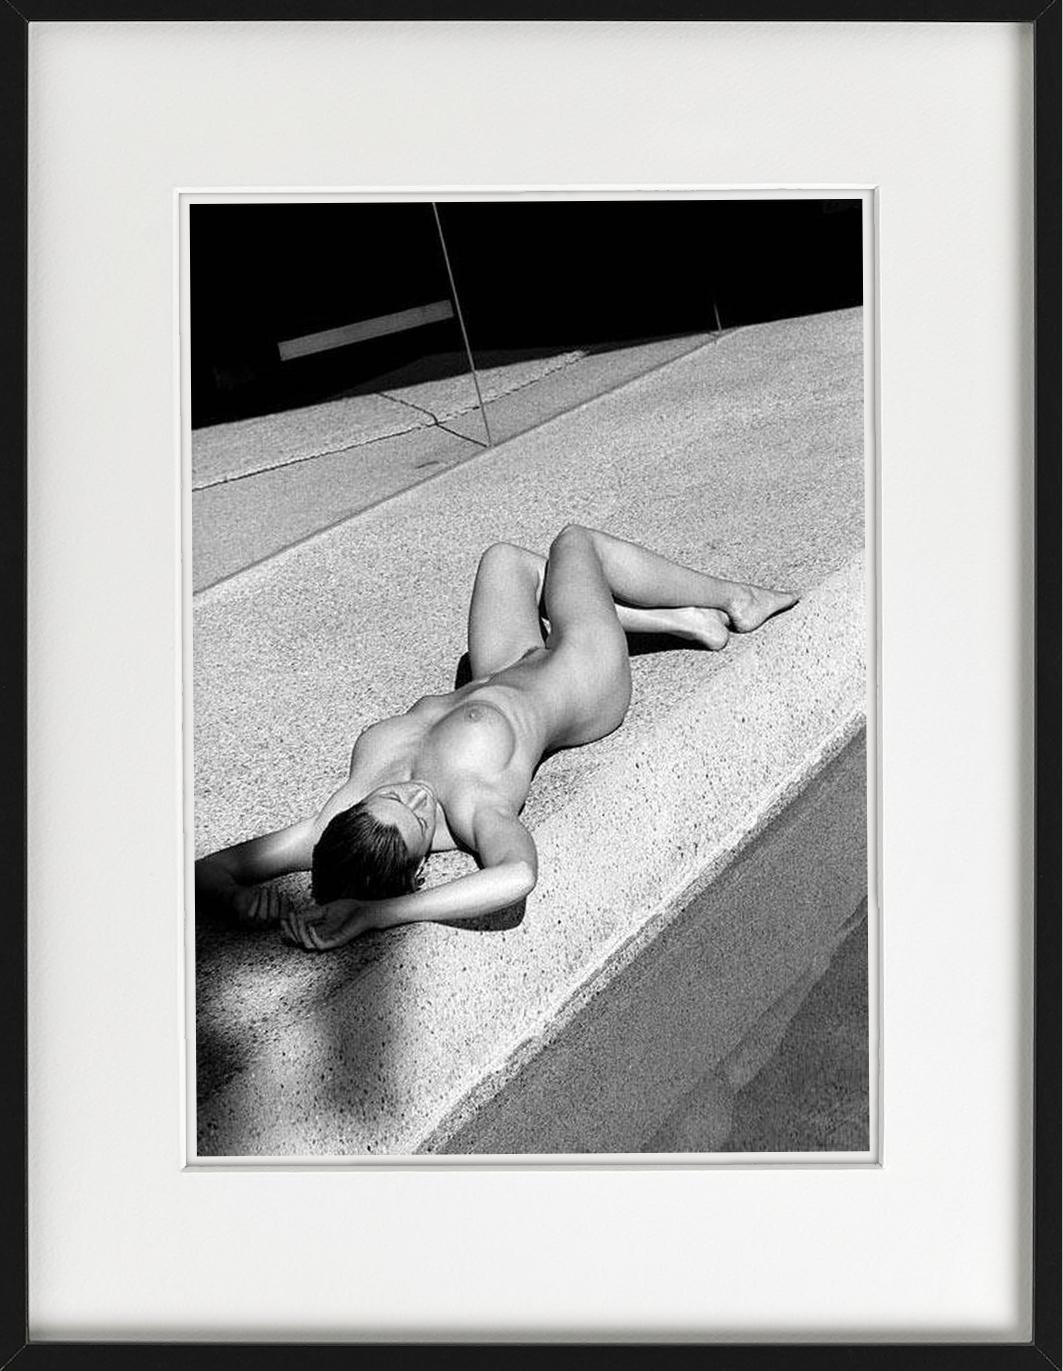 Carre Otis IV - nude next to the Pool in sunlight, fine art photography, 2001 - Photograph by Antoine Verglas